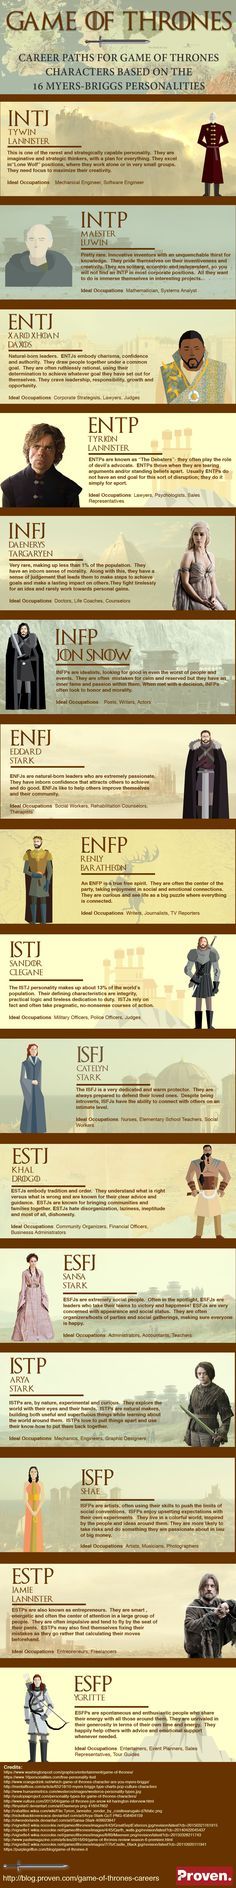 1556907166_213_Infographic-Careers-for-Game-of-Thrones-Characters-16-Career Infographic : Careers for Game of Thrones Characters: 16 Career Paths Based on Myers Briggs Personality Types #Infographic